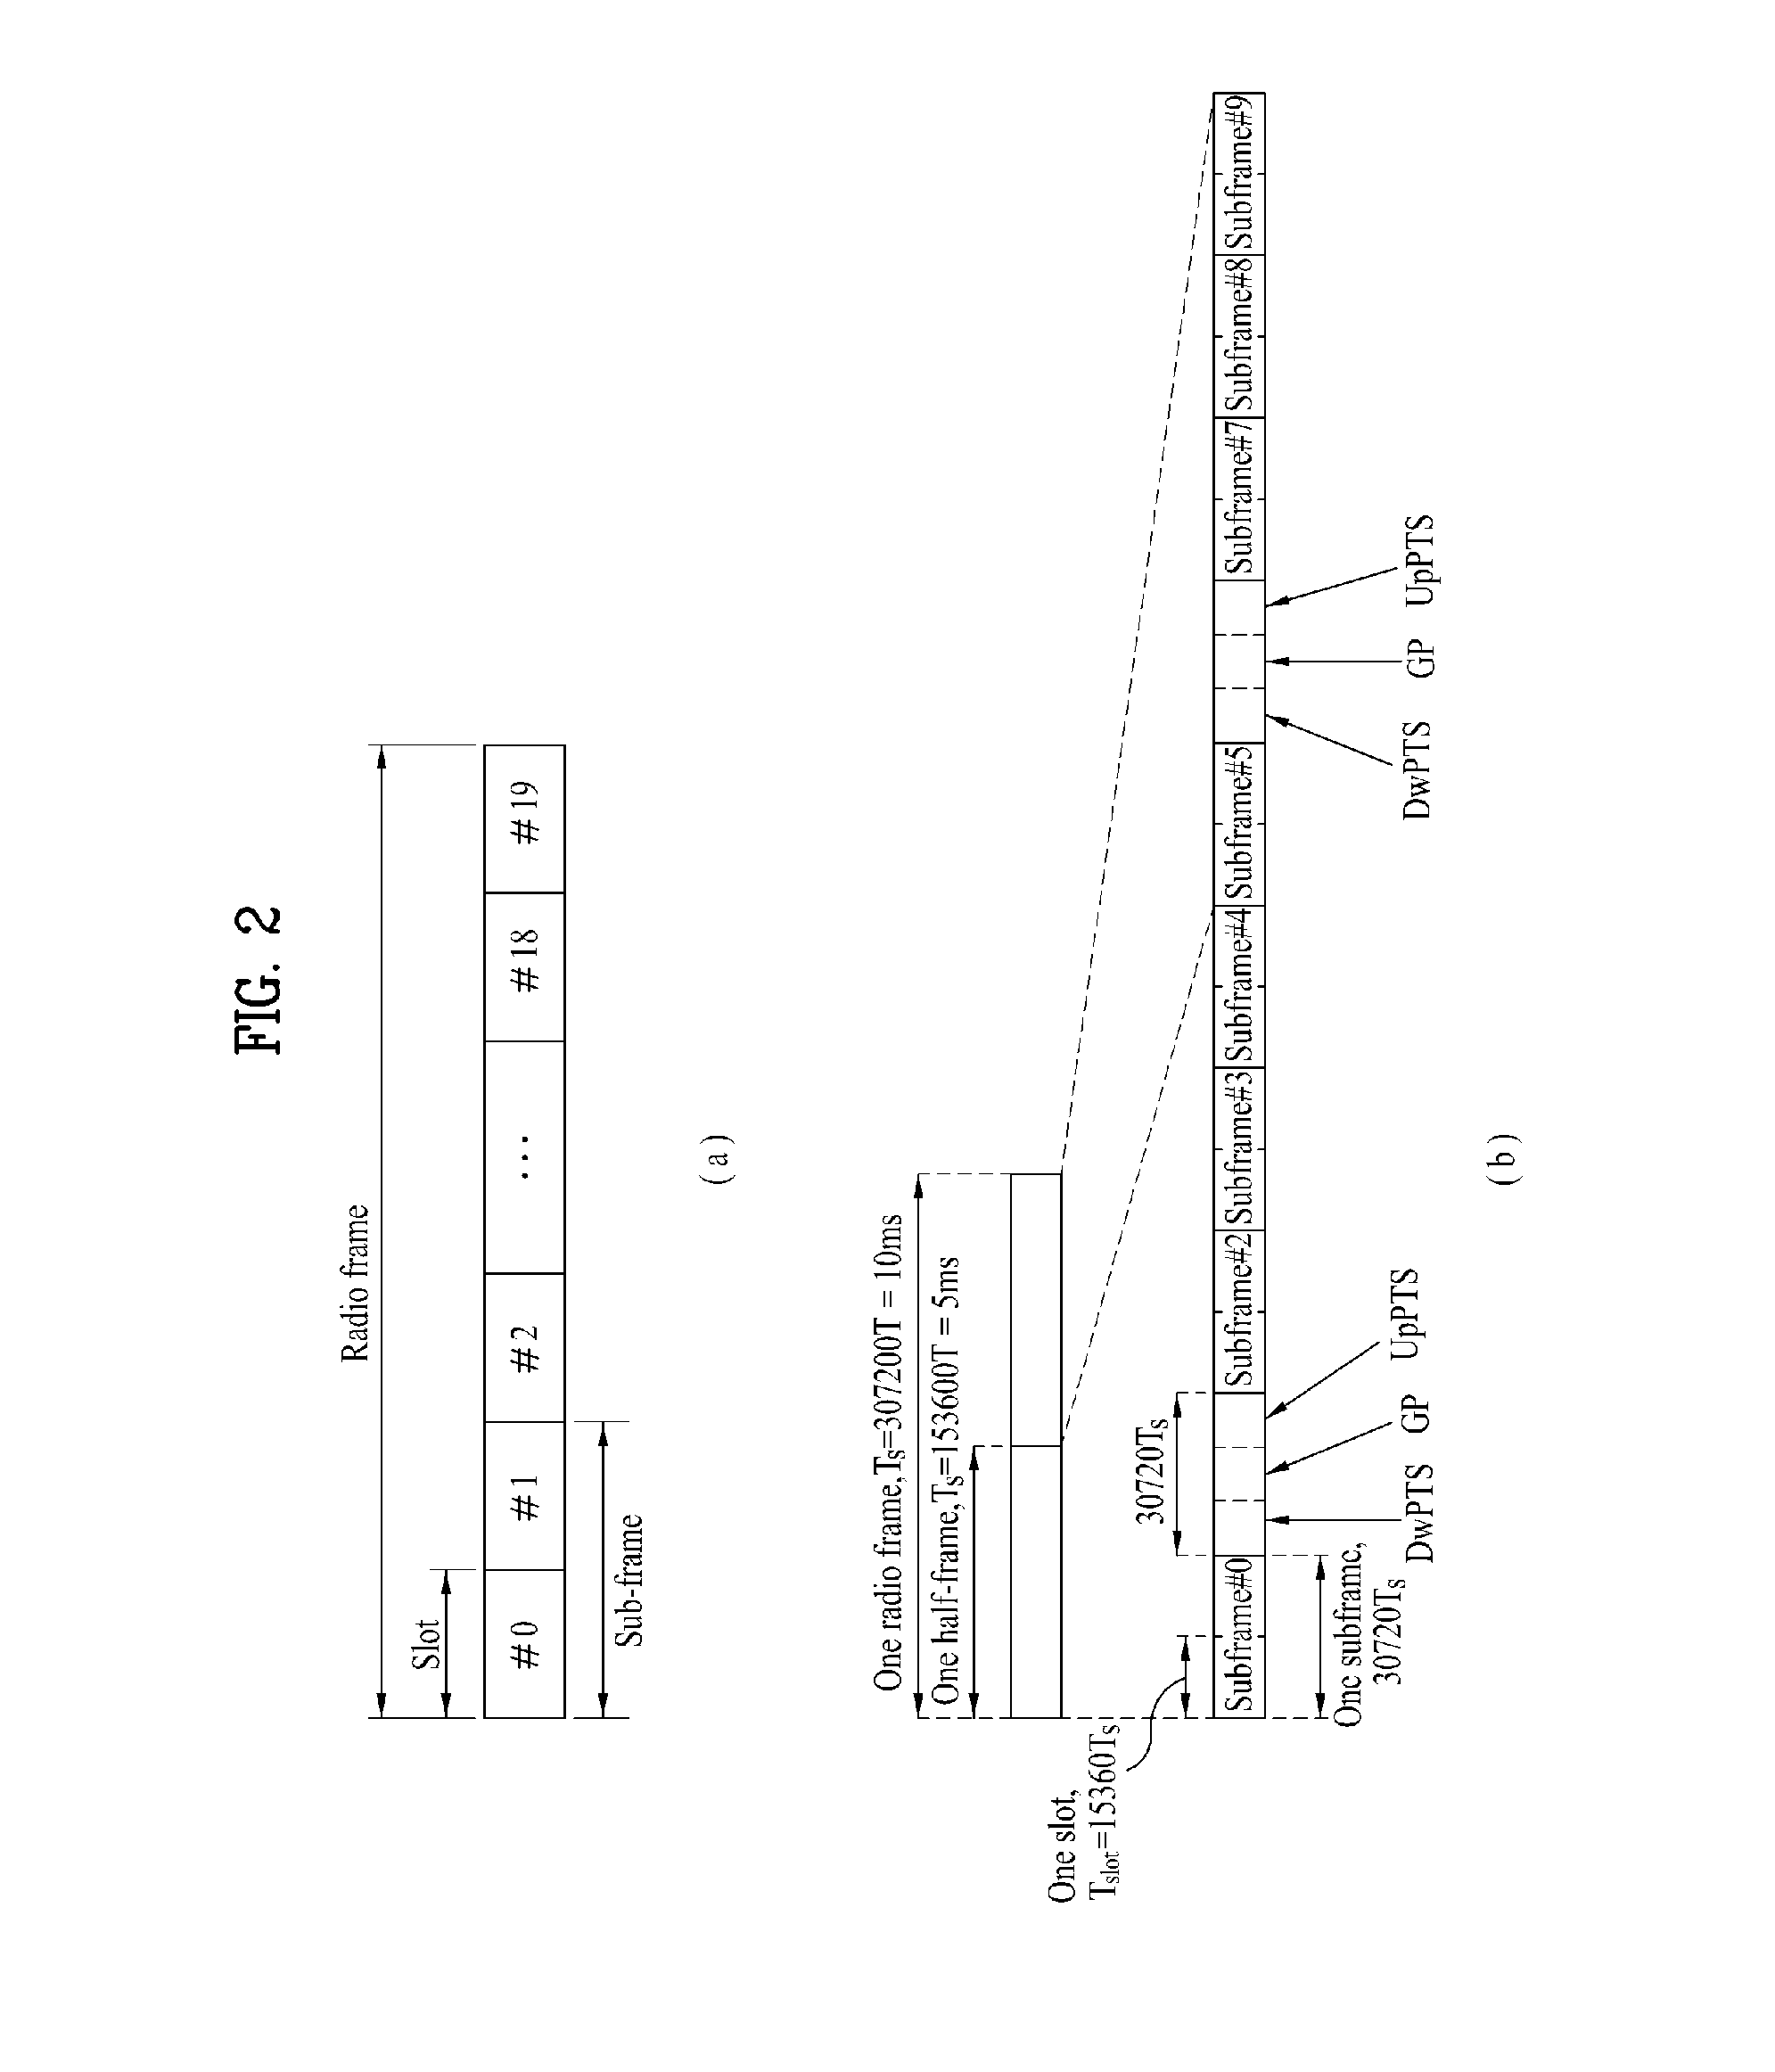 Method for terminal deciding uplink transmission power in macro cell environment comprising remote radio head (RRH), and terminal apparatus for same